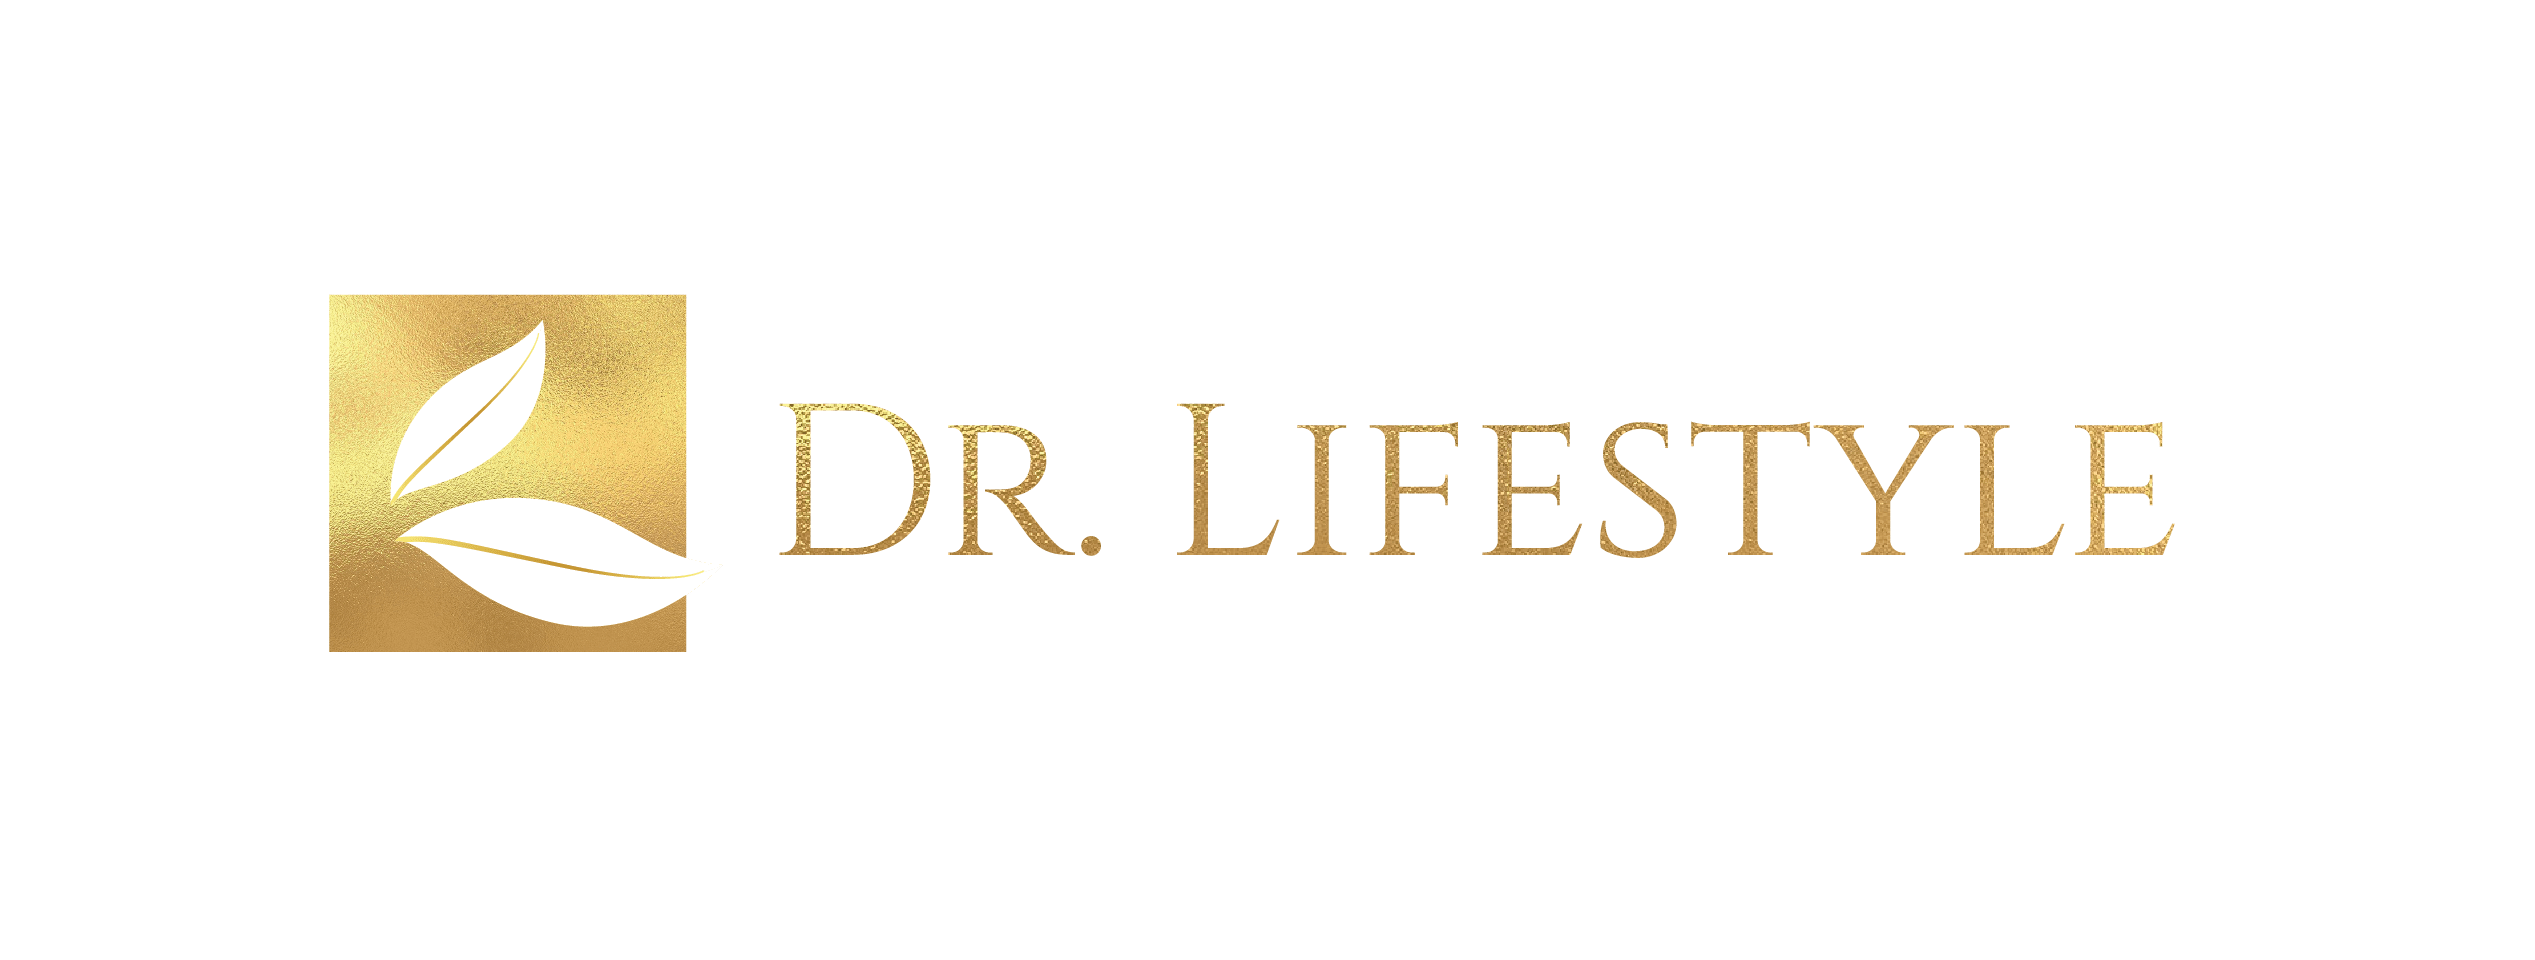 Dr. Lifestyle - Ribbon Cutting Ceremony